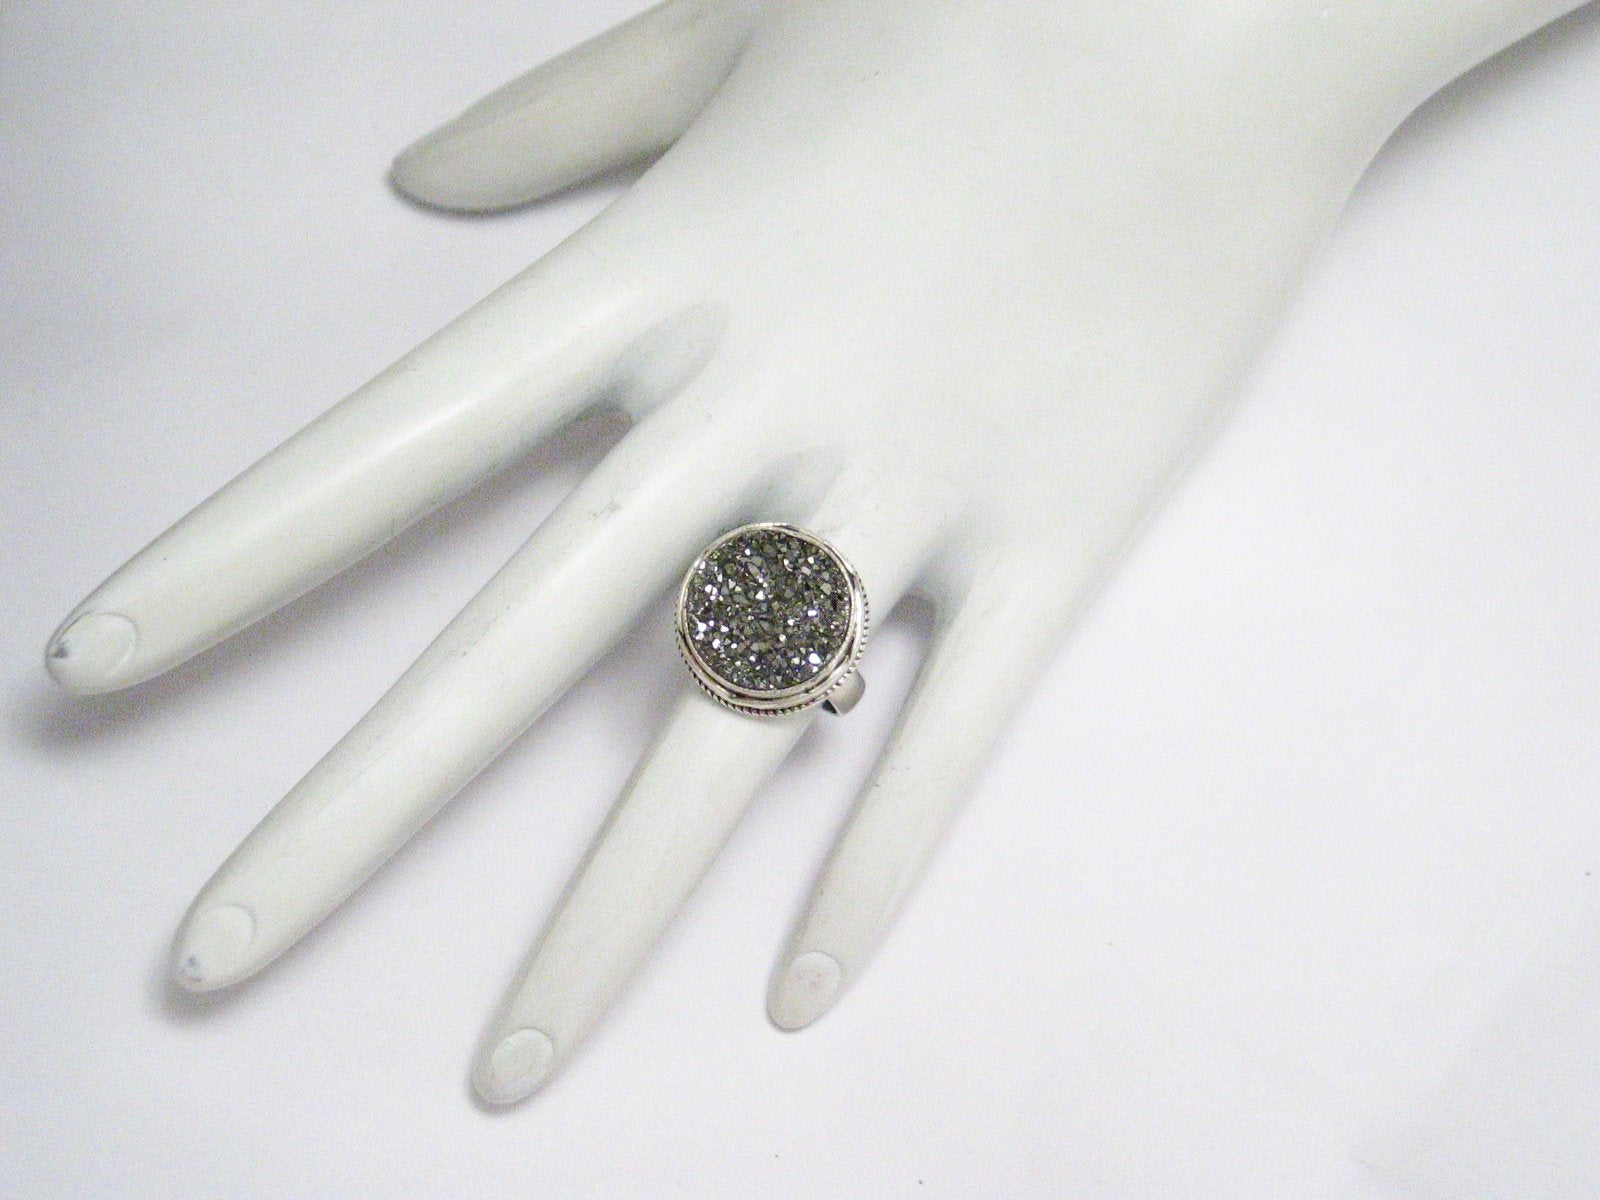 Rings | Unique Sterling Silver Gray Druzy Ring 6.5 | Blingschlingers Jewelry online